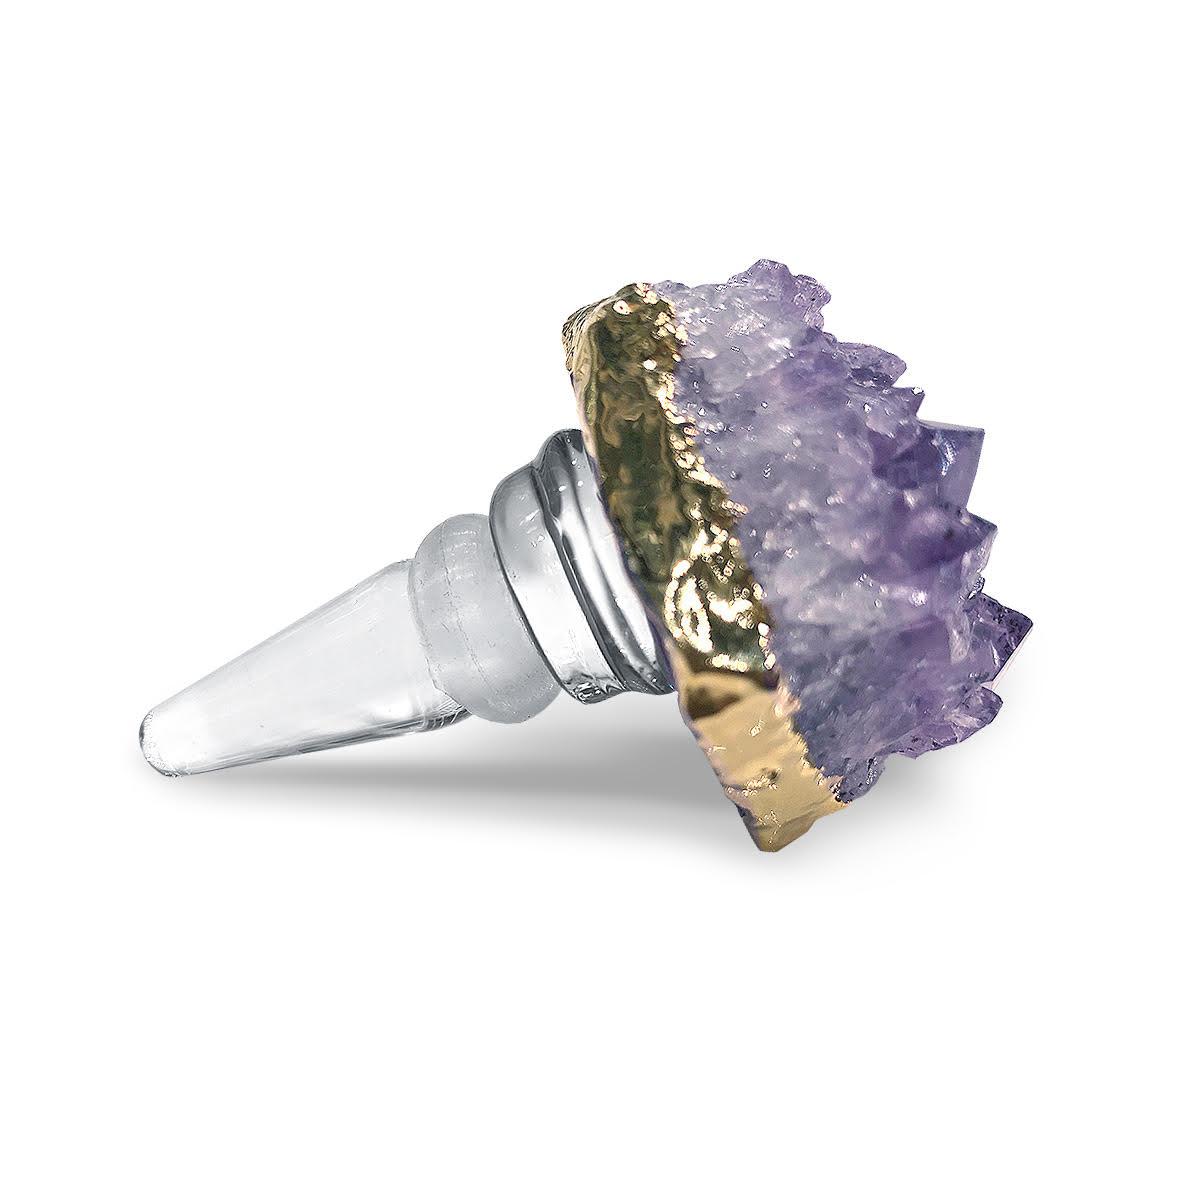 Amethyst with Gold Trim Wine Stopper